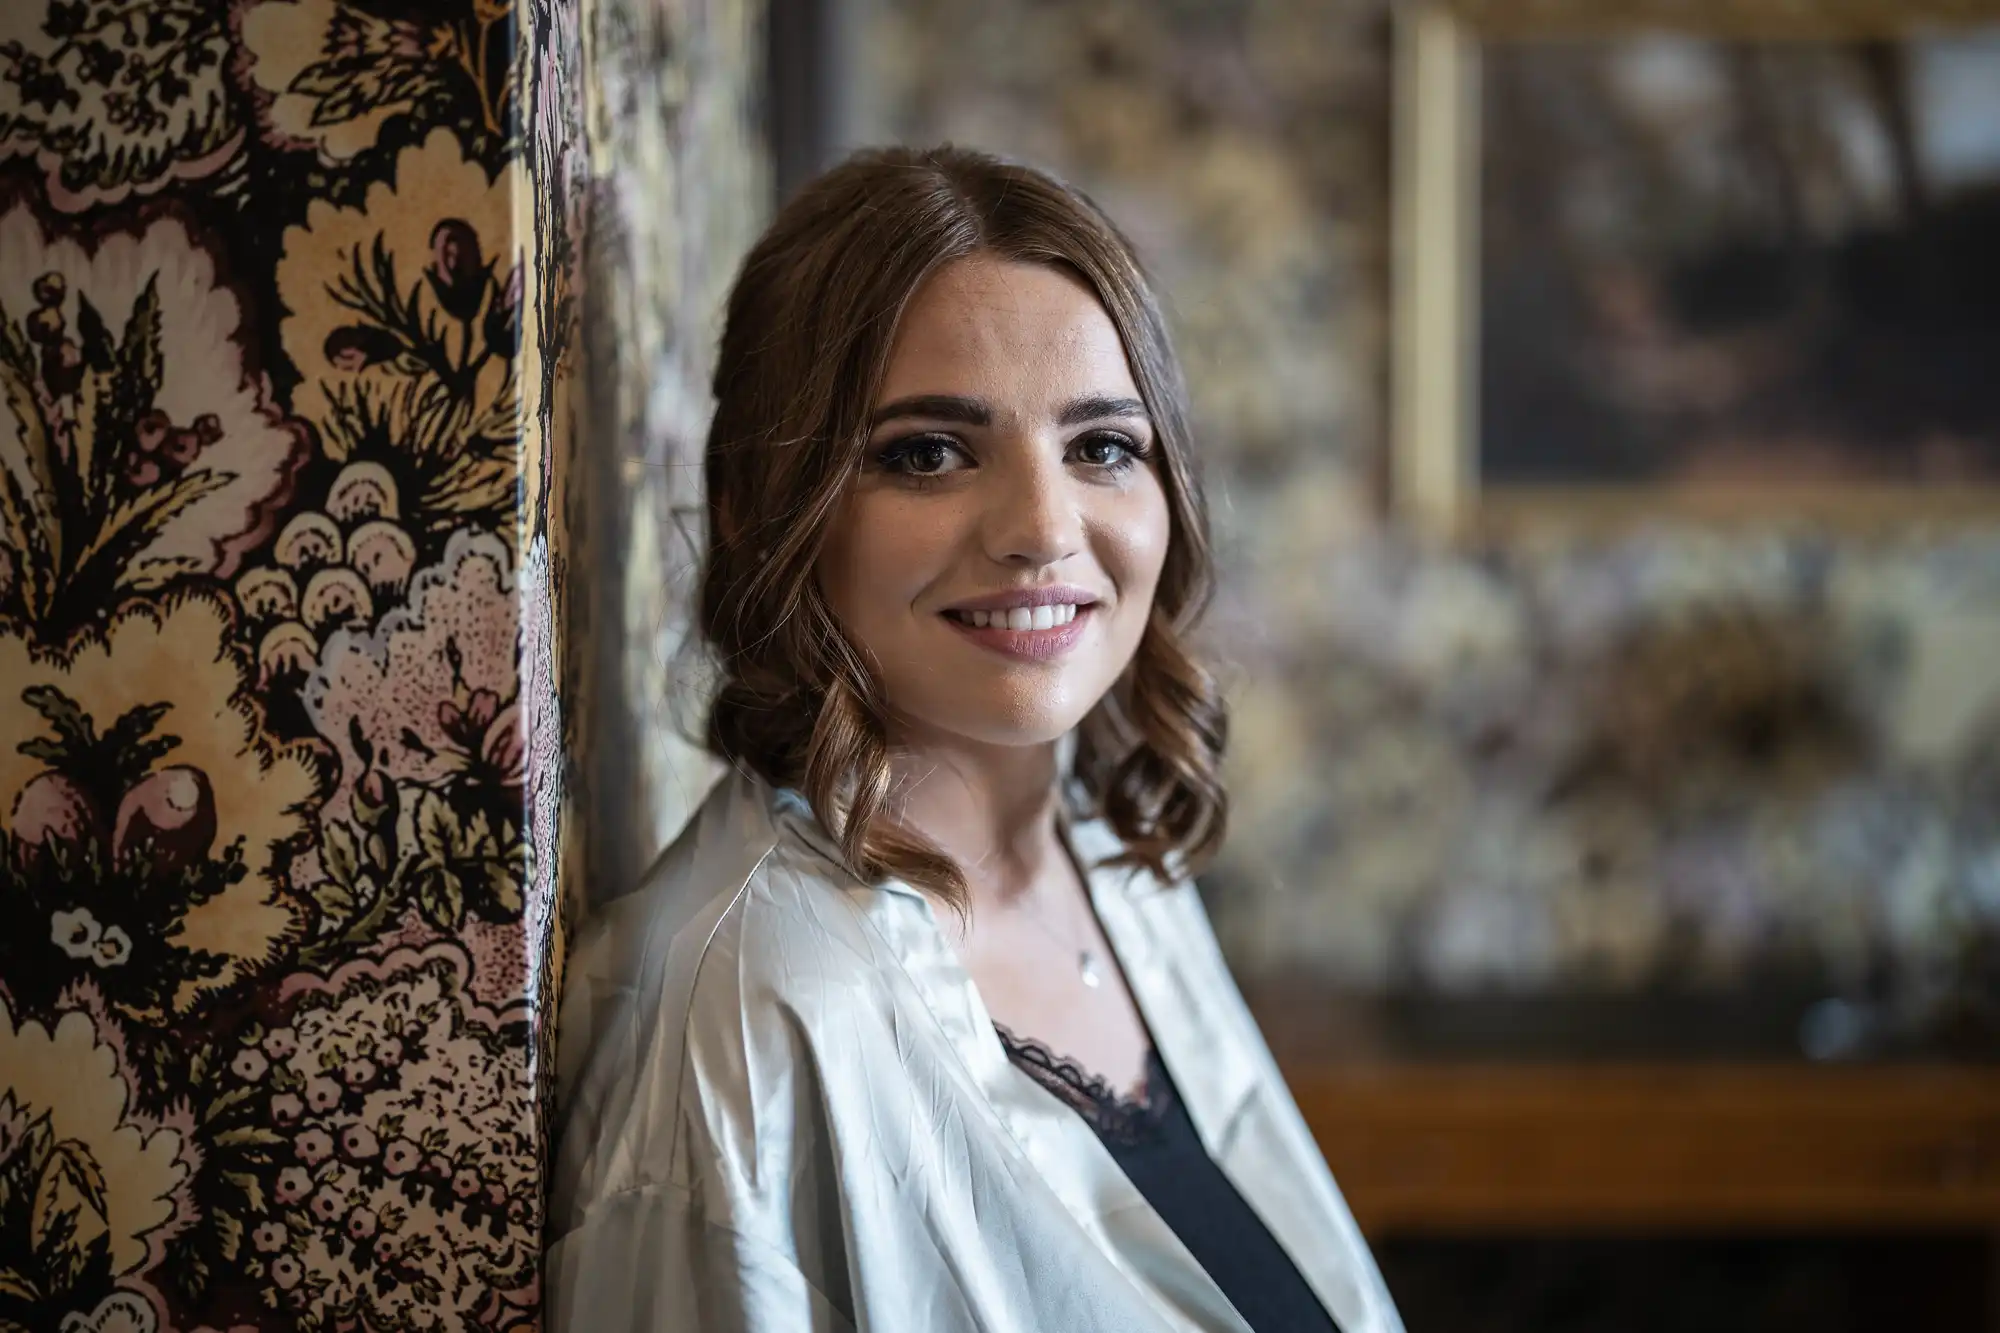 A smiling woman with shoulder-length brown hair, wearing a white blouse, seated next to a floral-patterned wall.